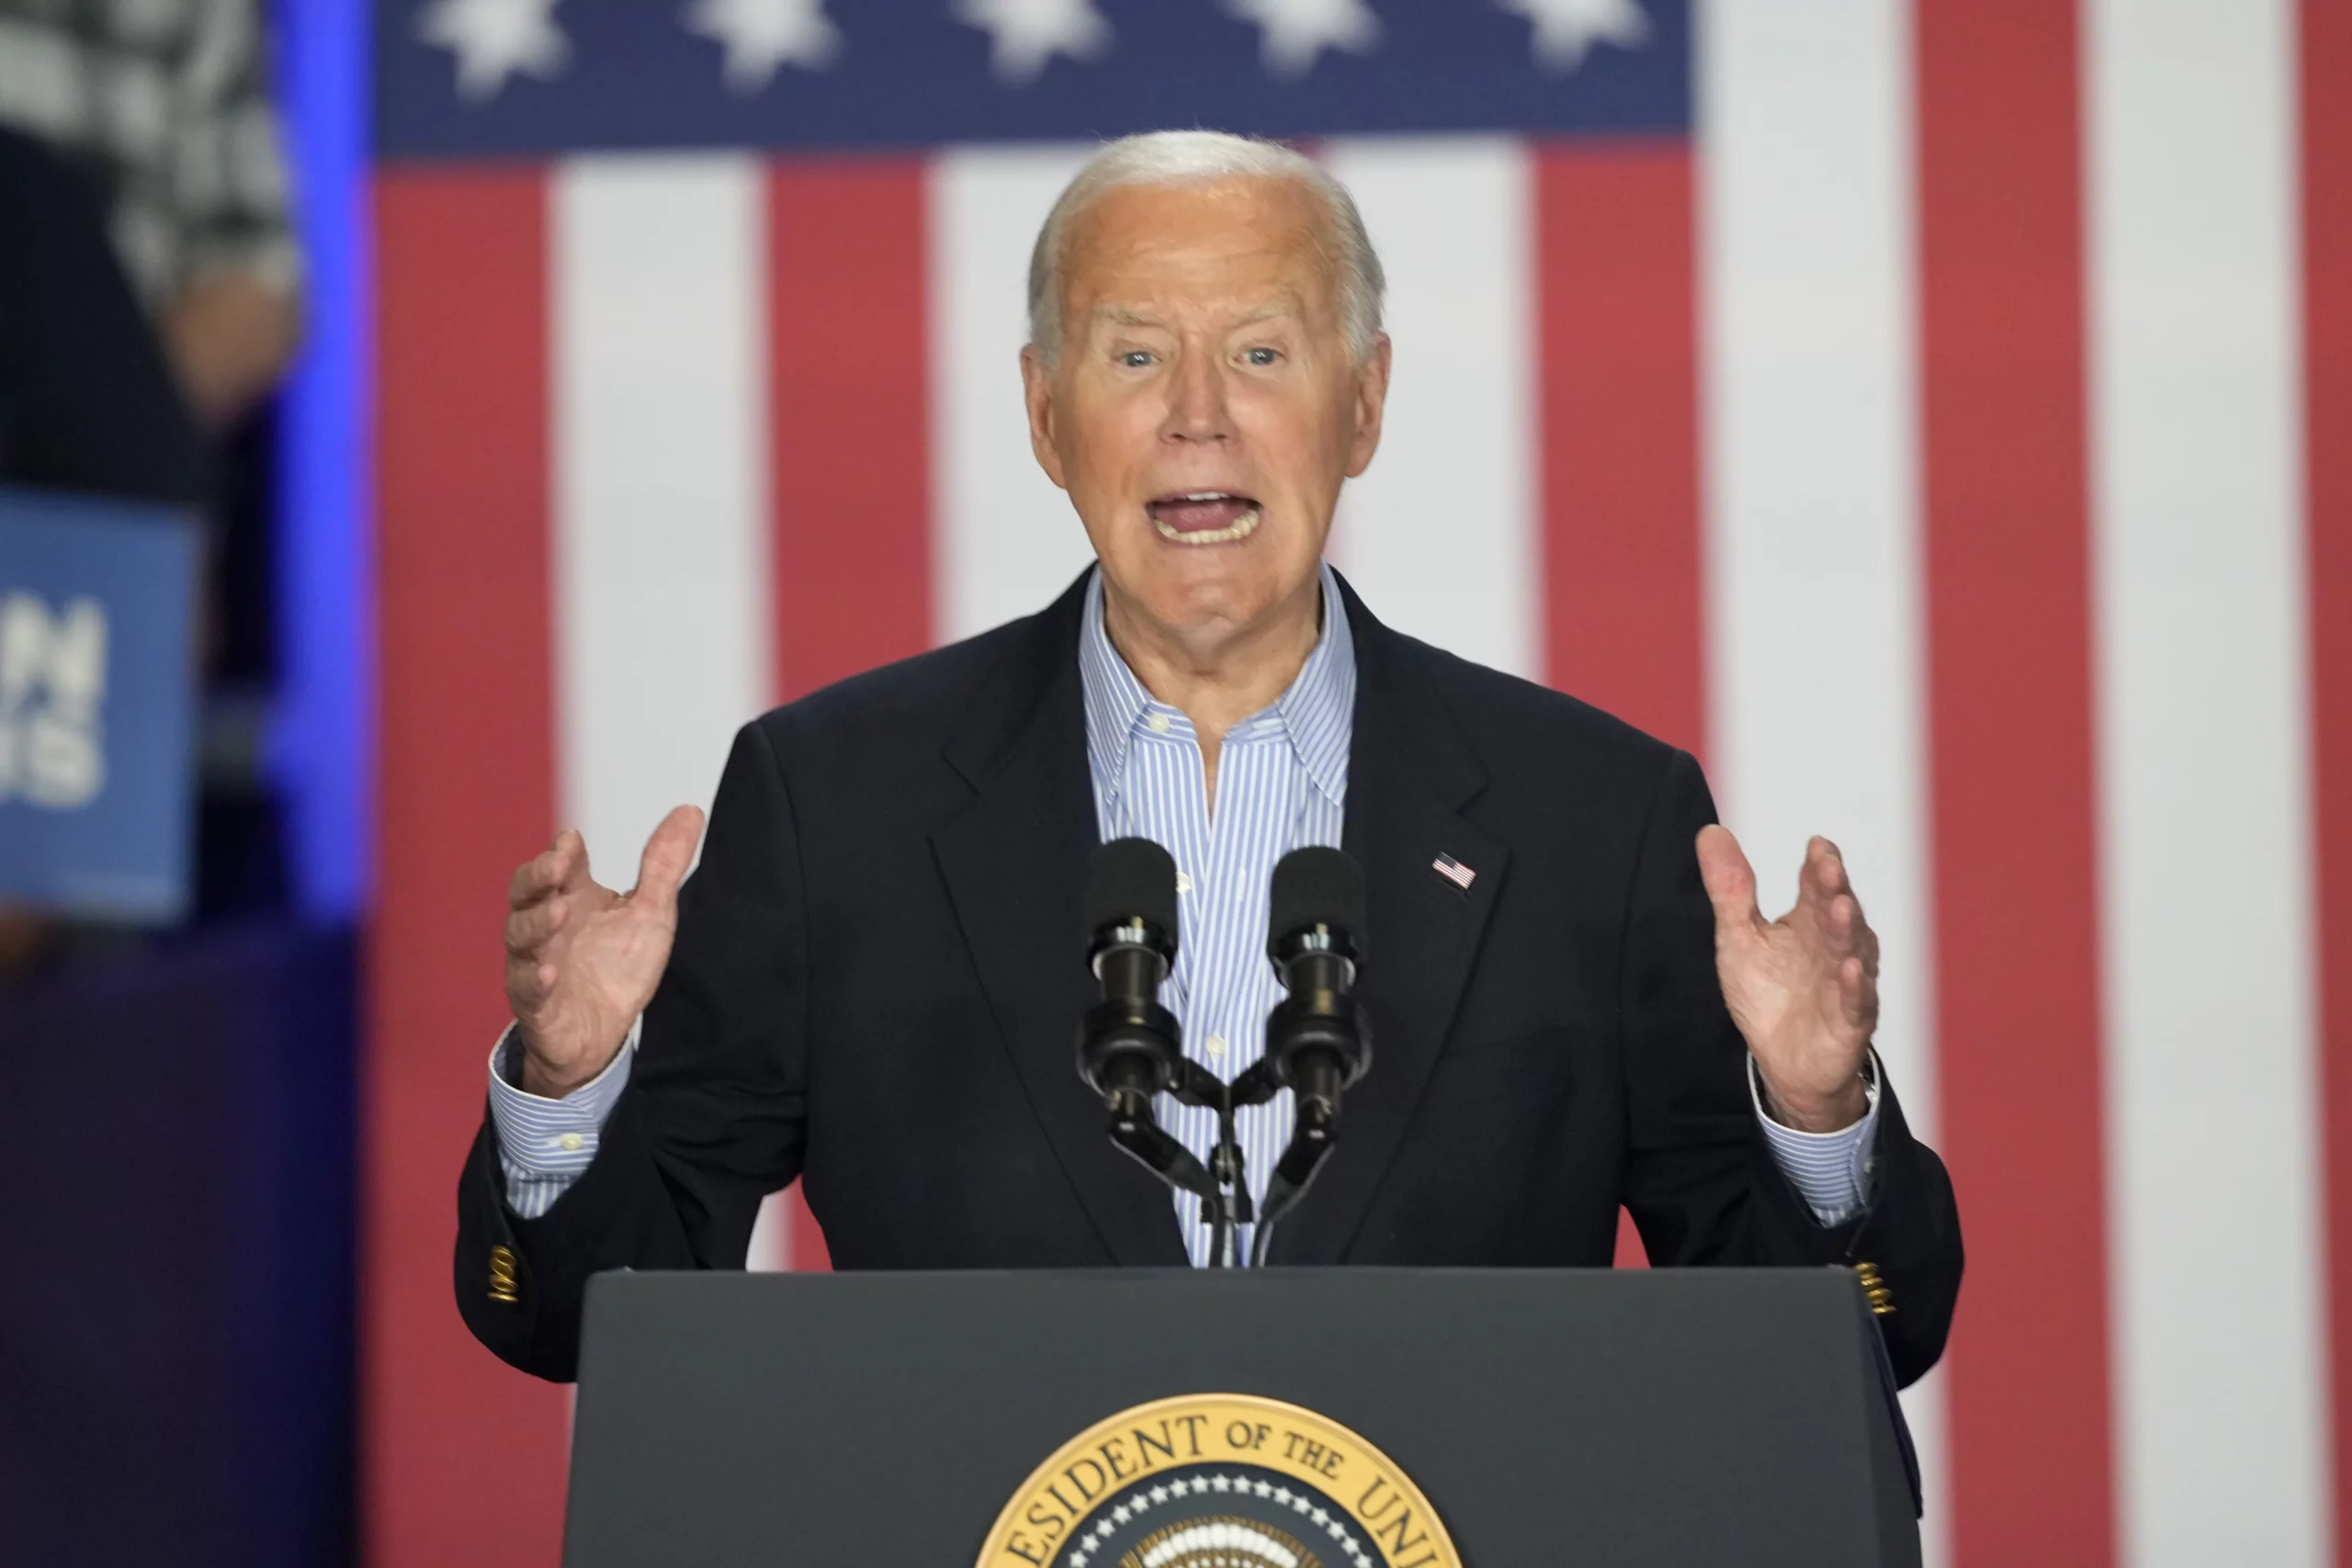 Biden vows he won’t be pushed out the race 'in 2020'